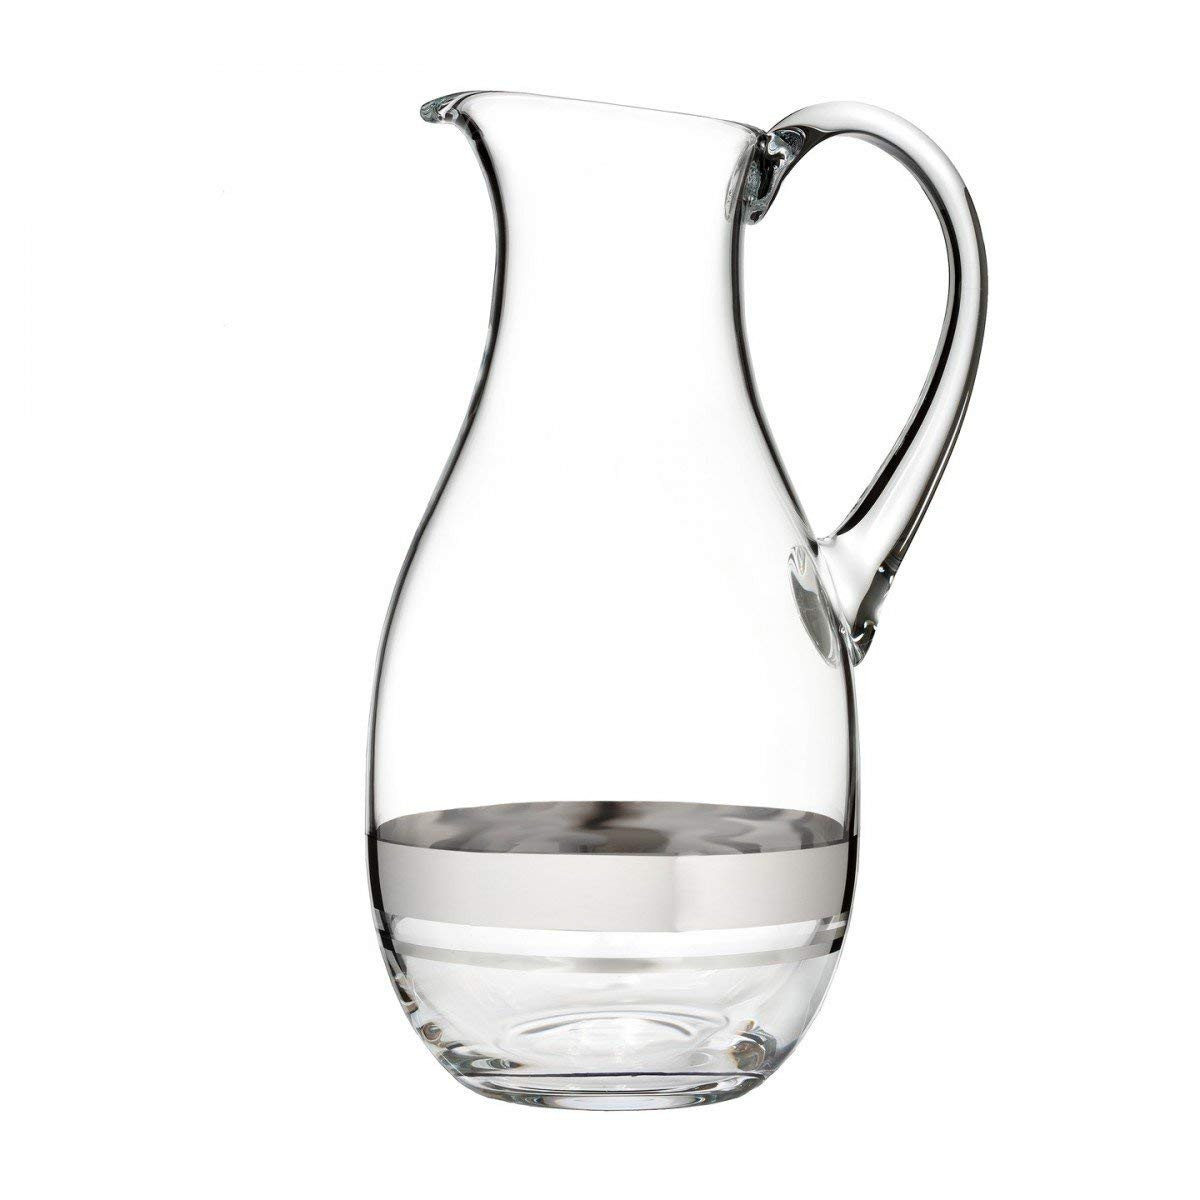 20 Nice Waterford Lismore Diamond Vase 2024 free download waterford lismore diamond vase of amazon com elegance pitcher carafes pitchers for 614s1vvffpl sl1200